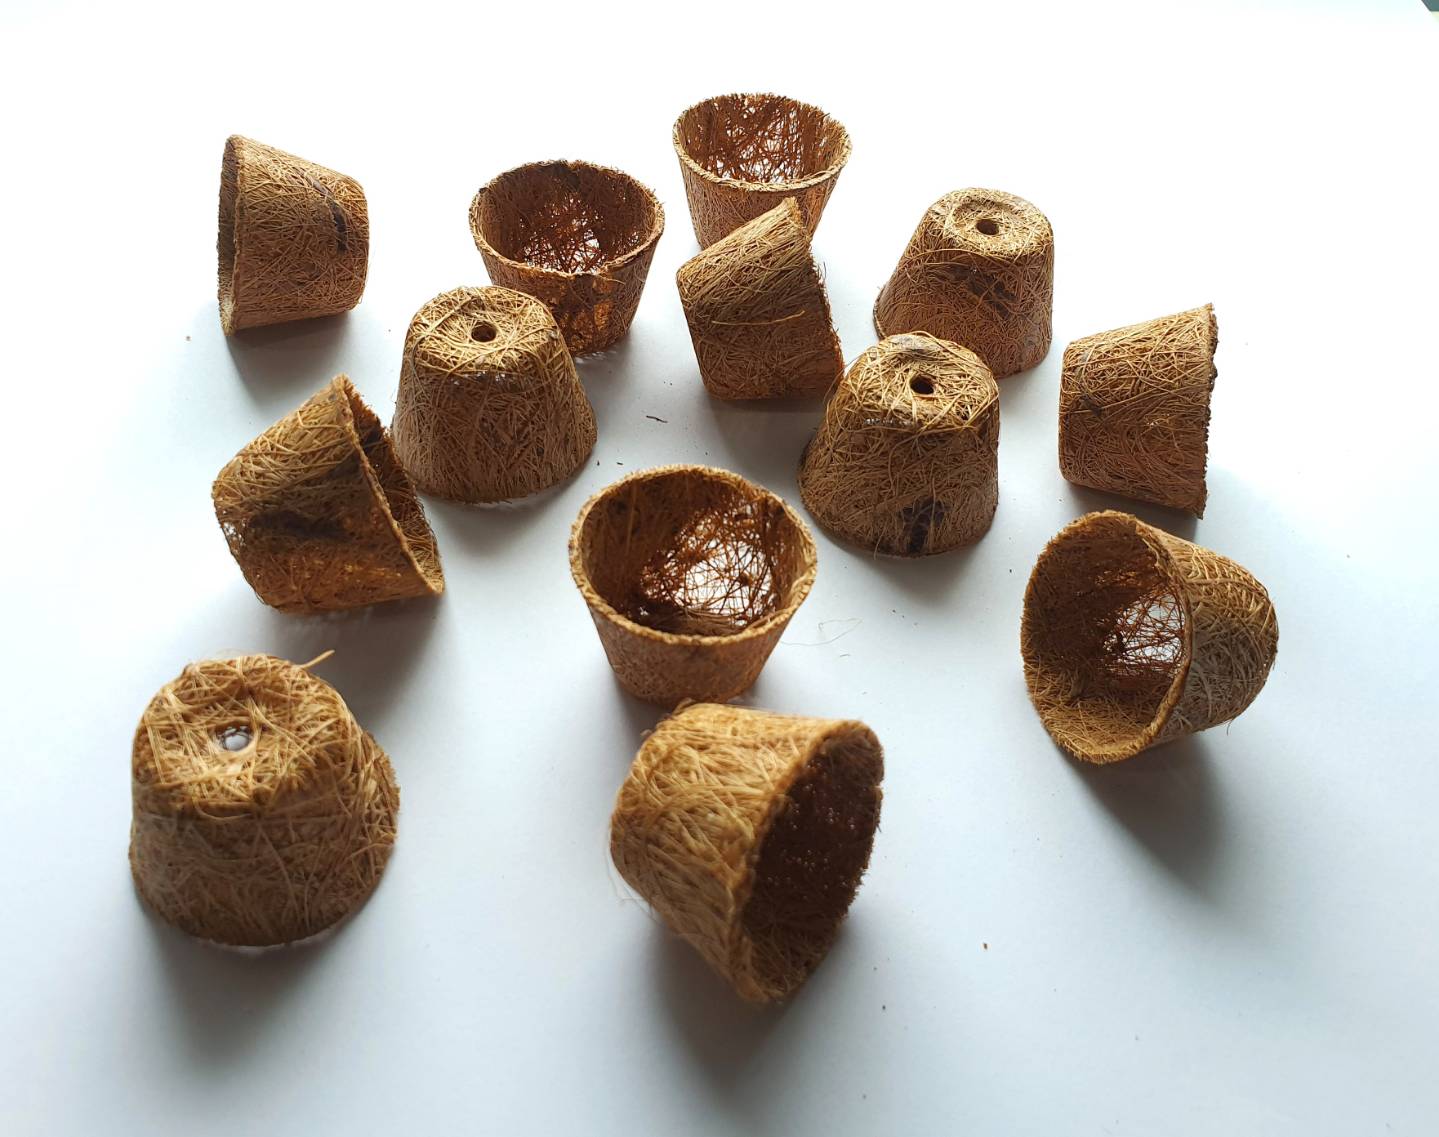 Biodegradable seed pots